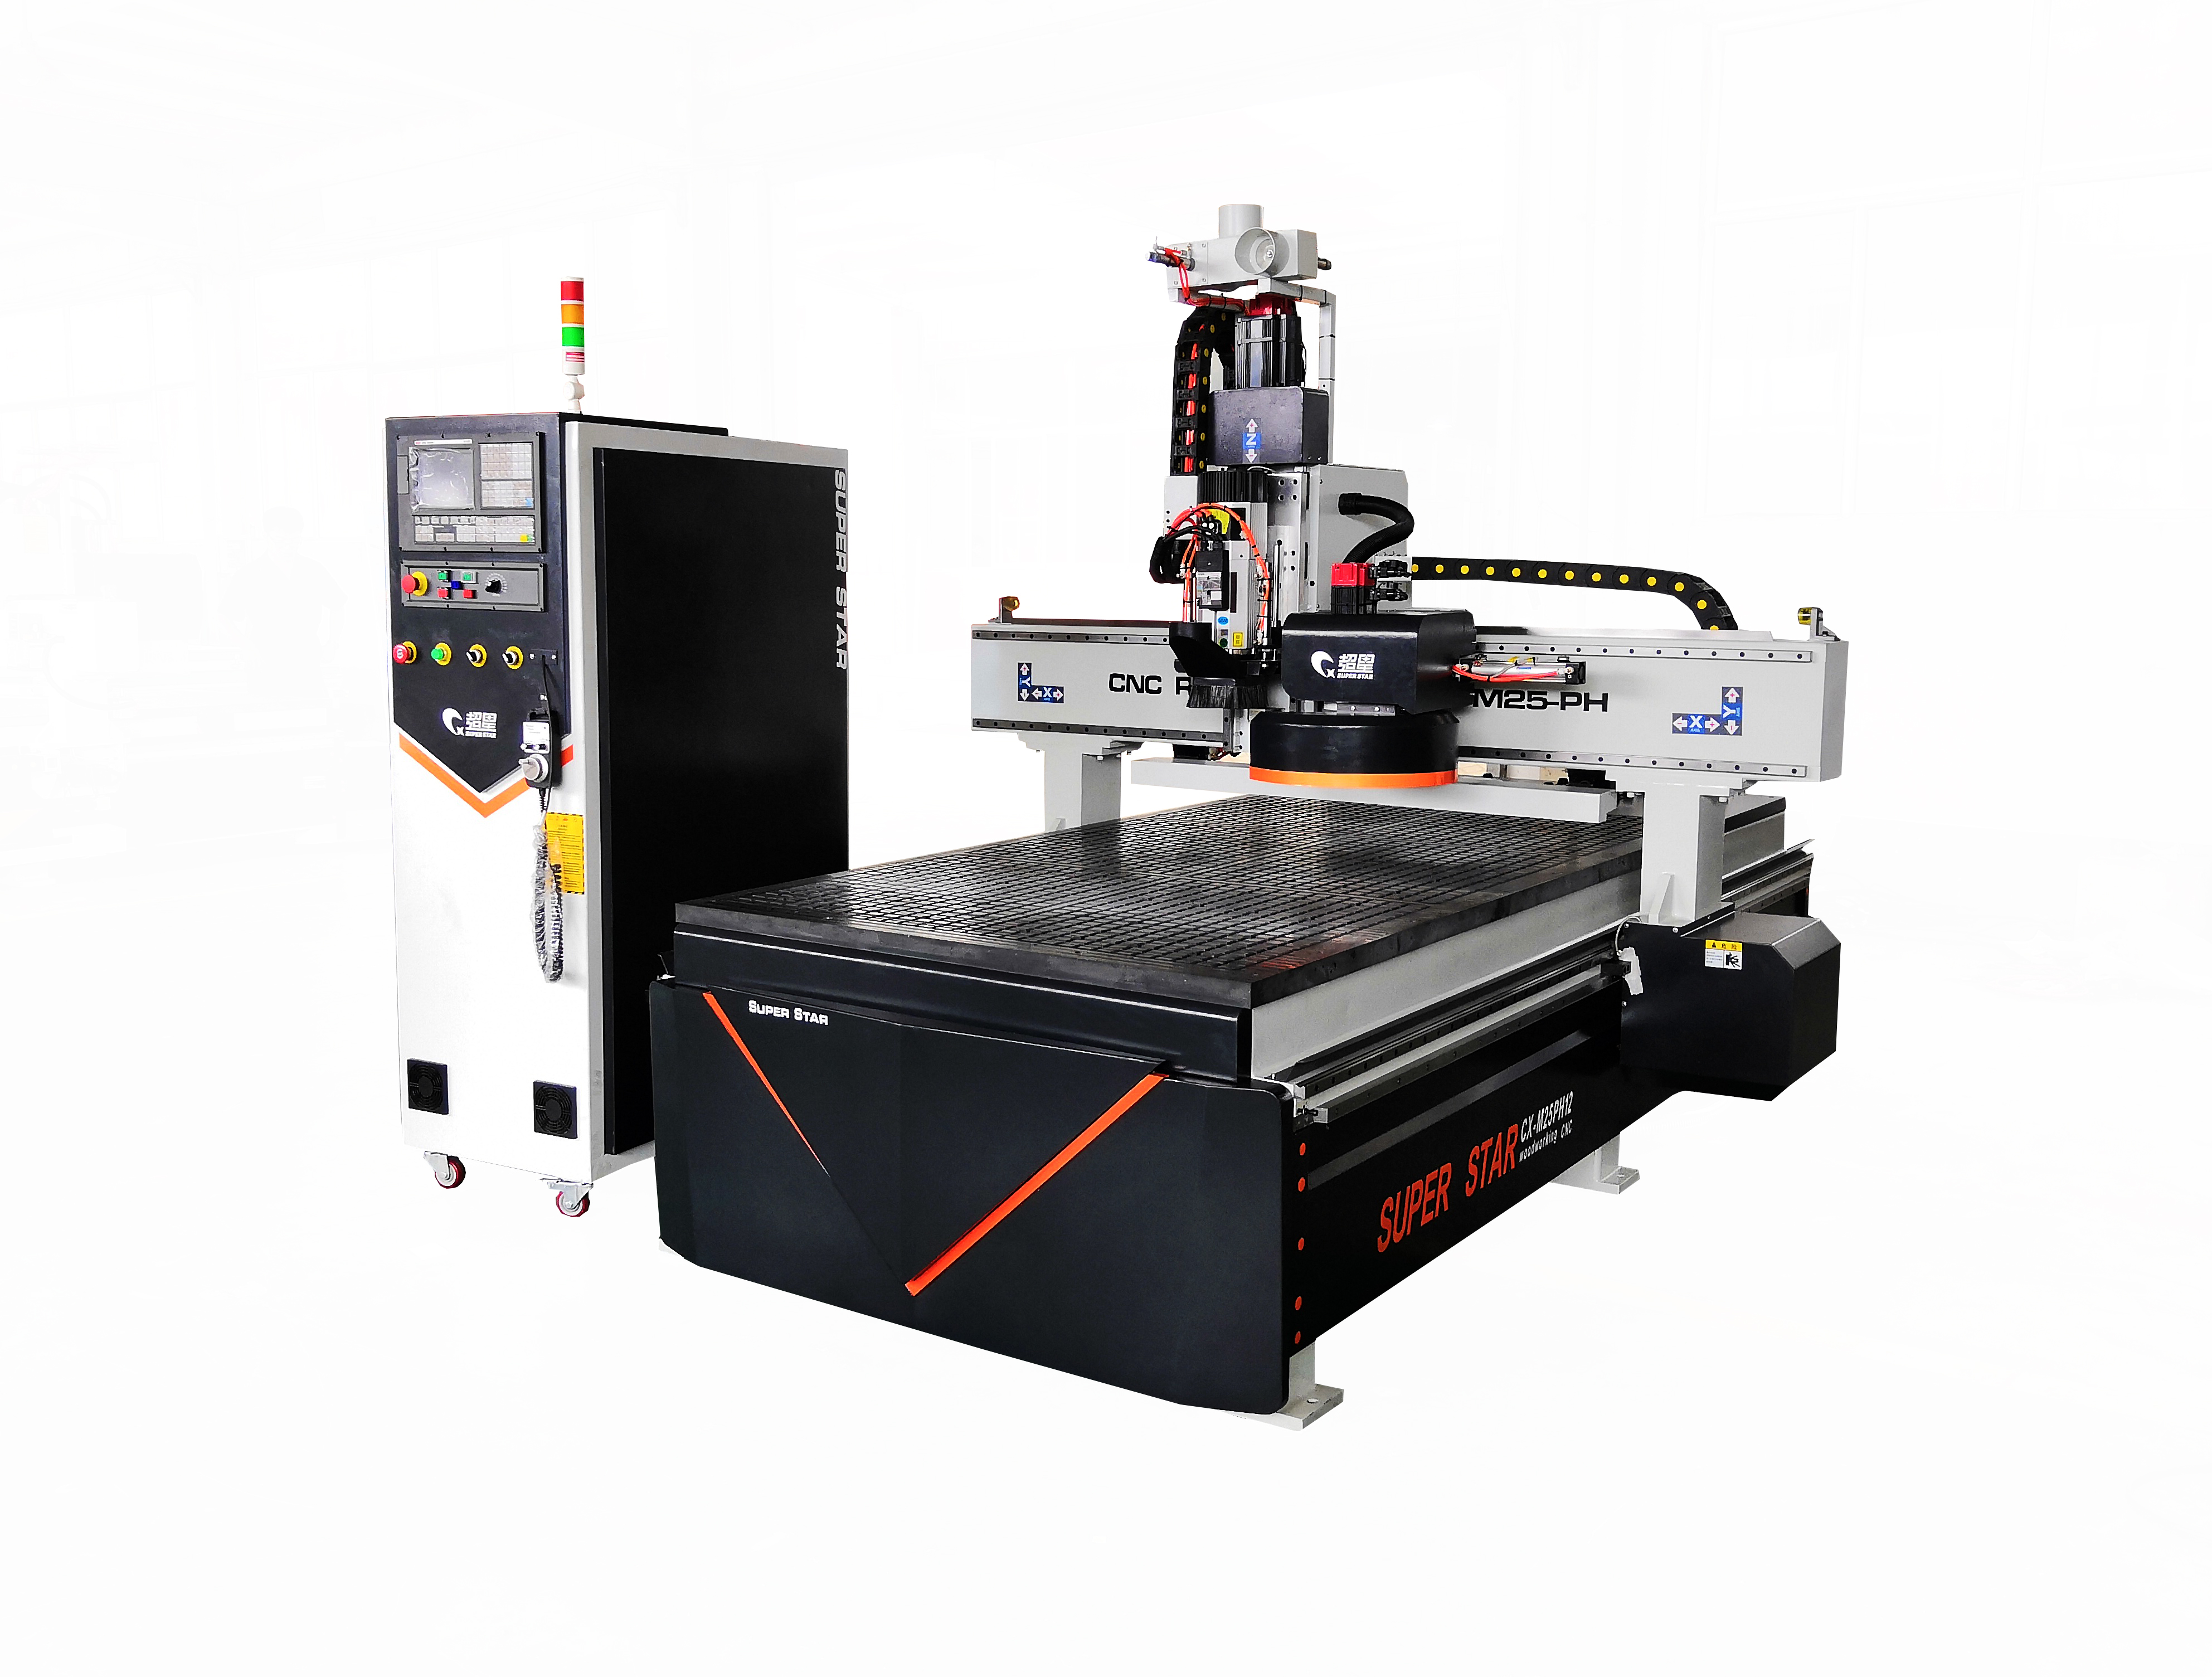 Why choose CNC cutting machine instead of woodworking engraving machine for panel furniture cutting?